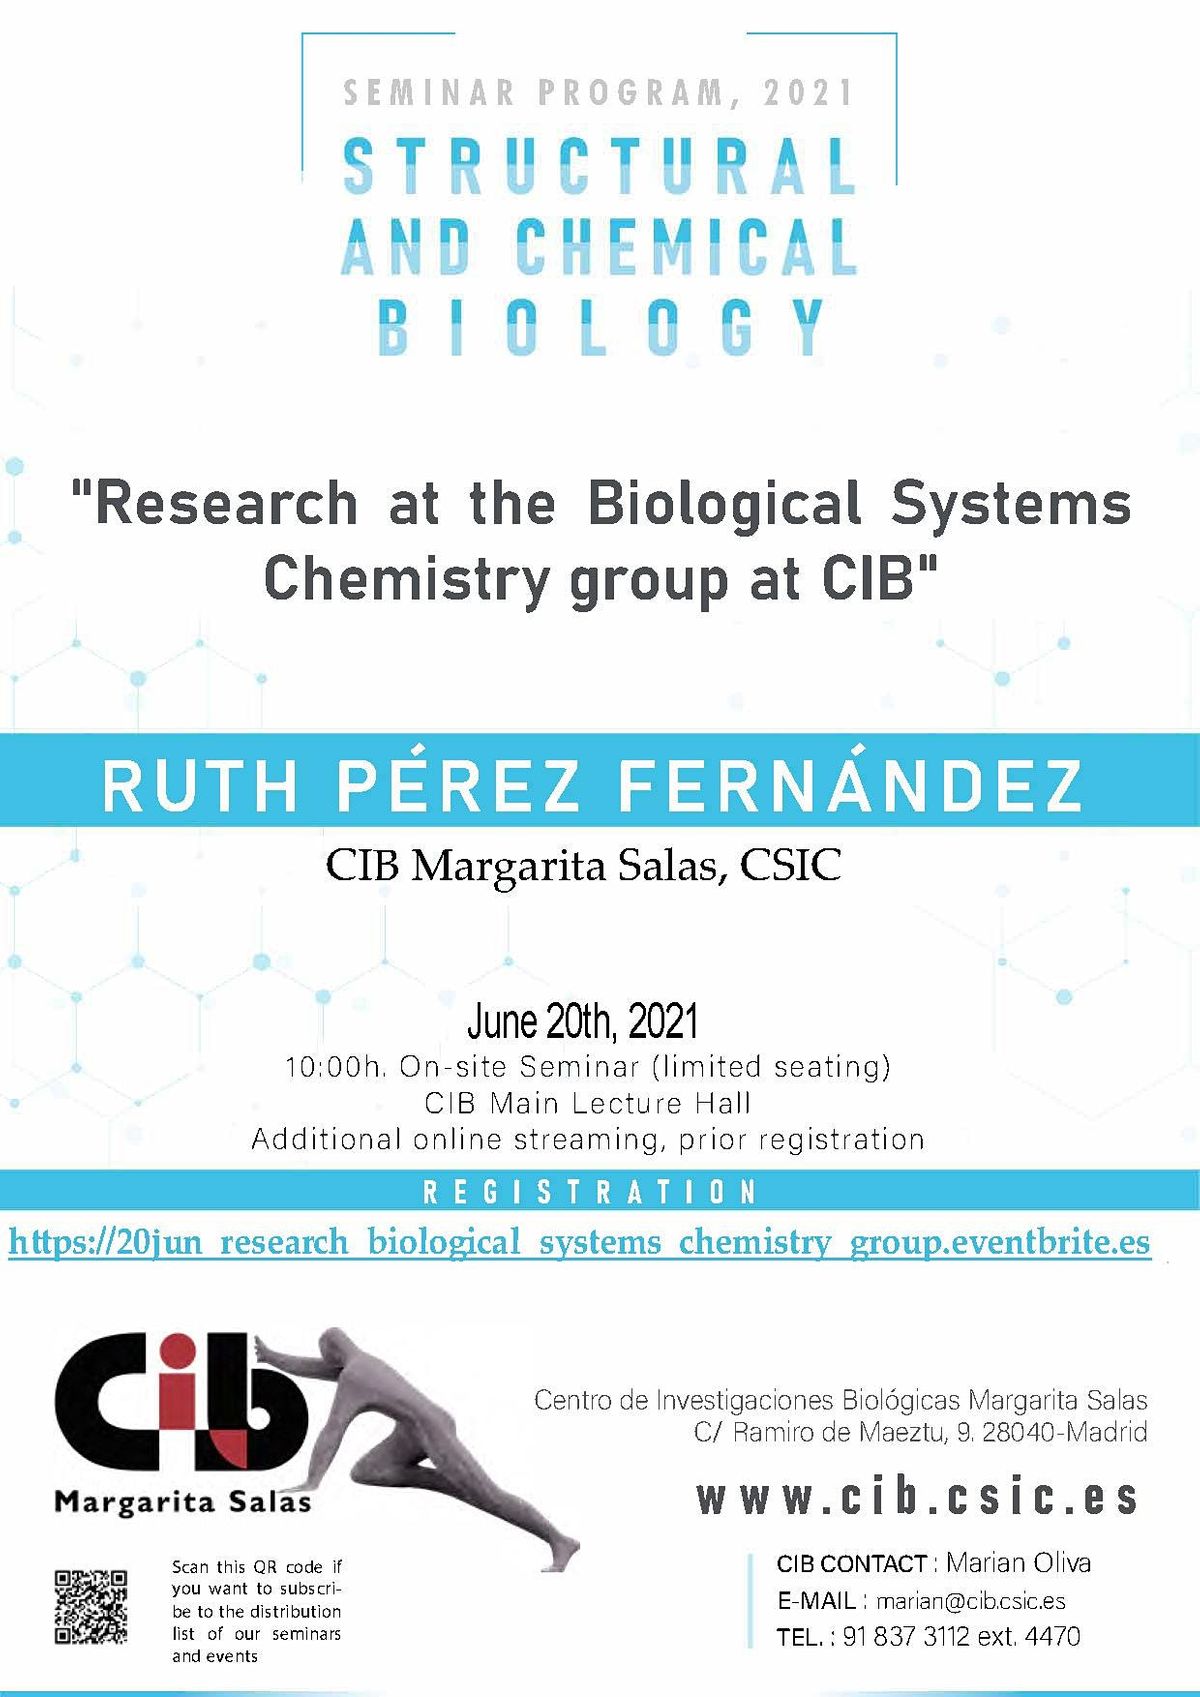 Research at the Biological Systems Chemistry group at CIB